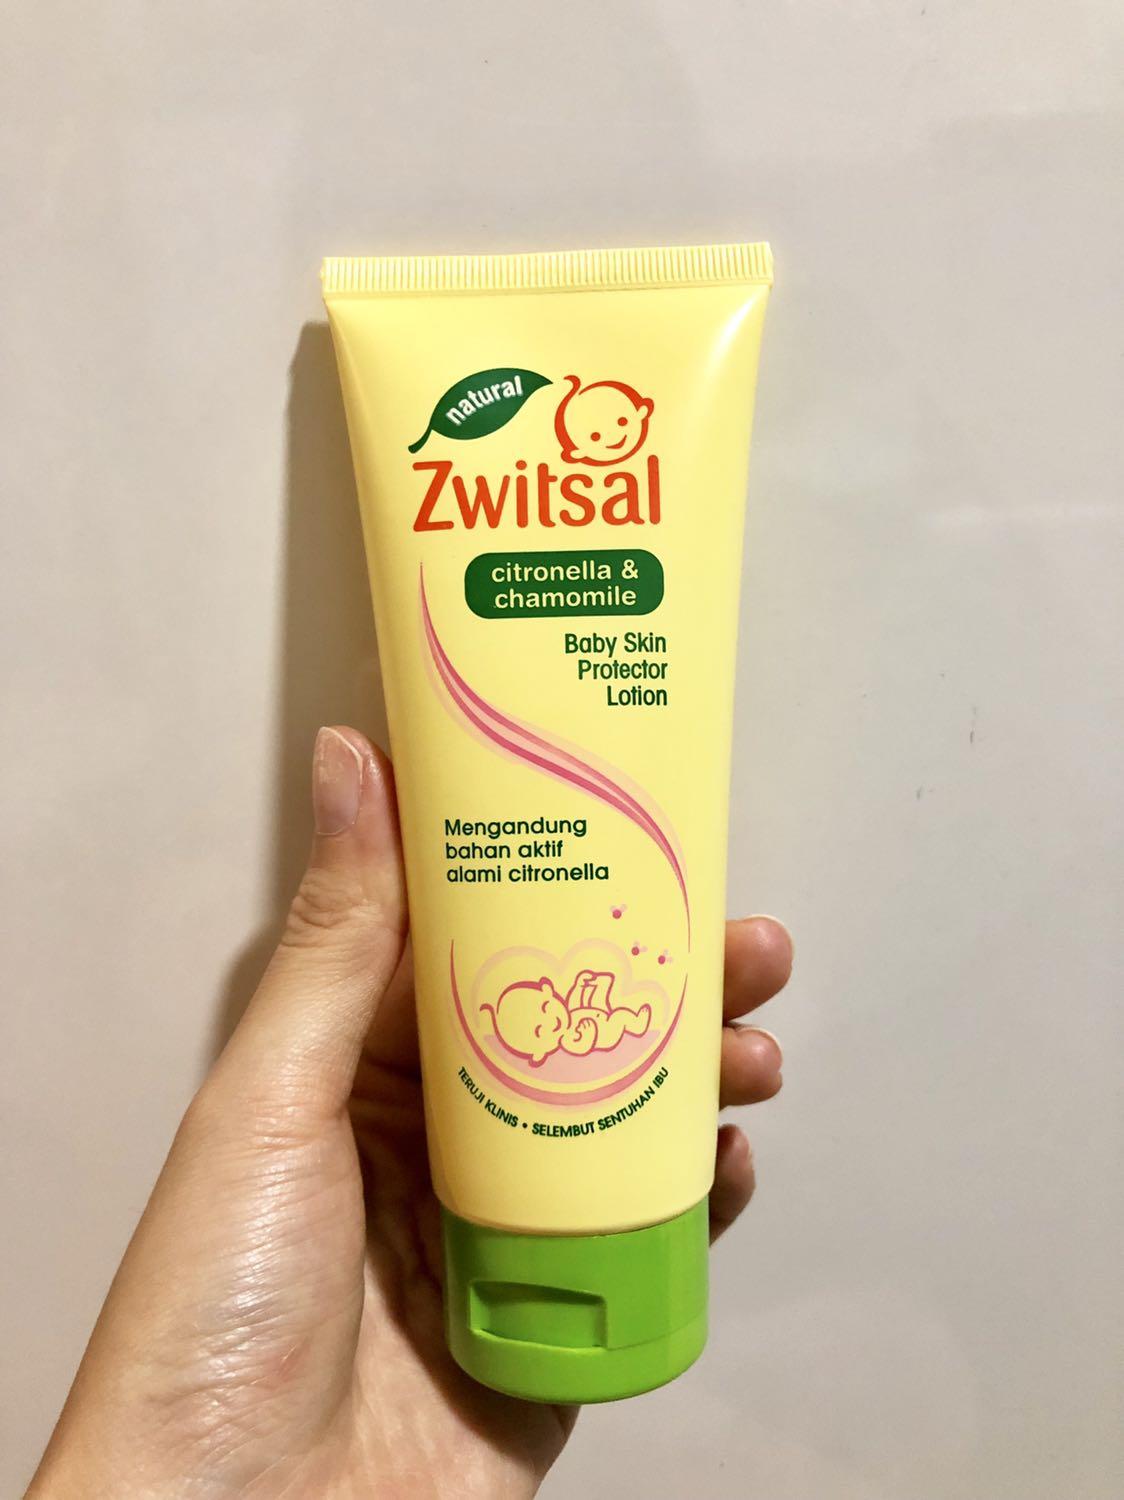 Expiry date Sept - Zwitsal Baby Skin Protector Lotion with Citronella & Chamomile - 100ml , Babies & Kids, & Feeding, Bottle Feeding on Carousell